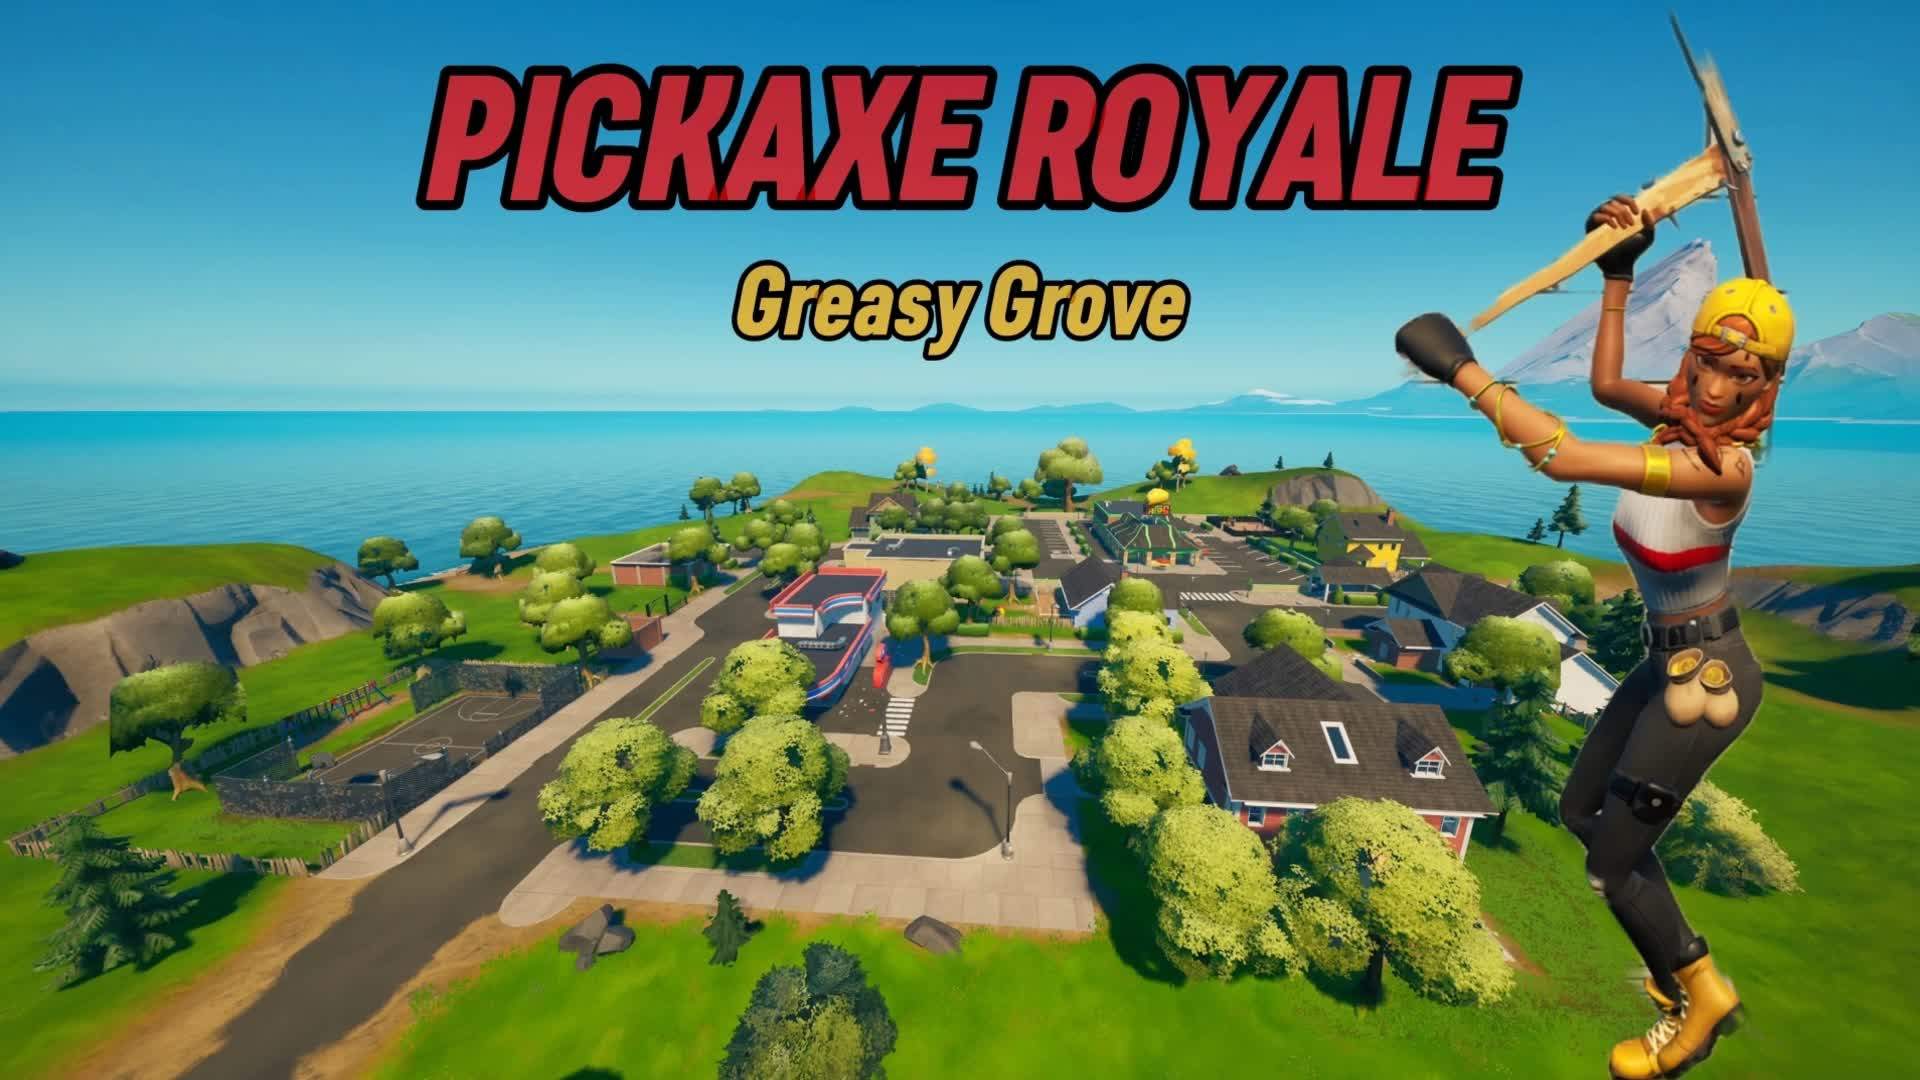 Pickaxe Royale Greasy